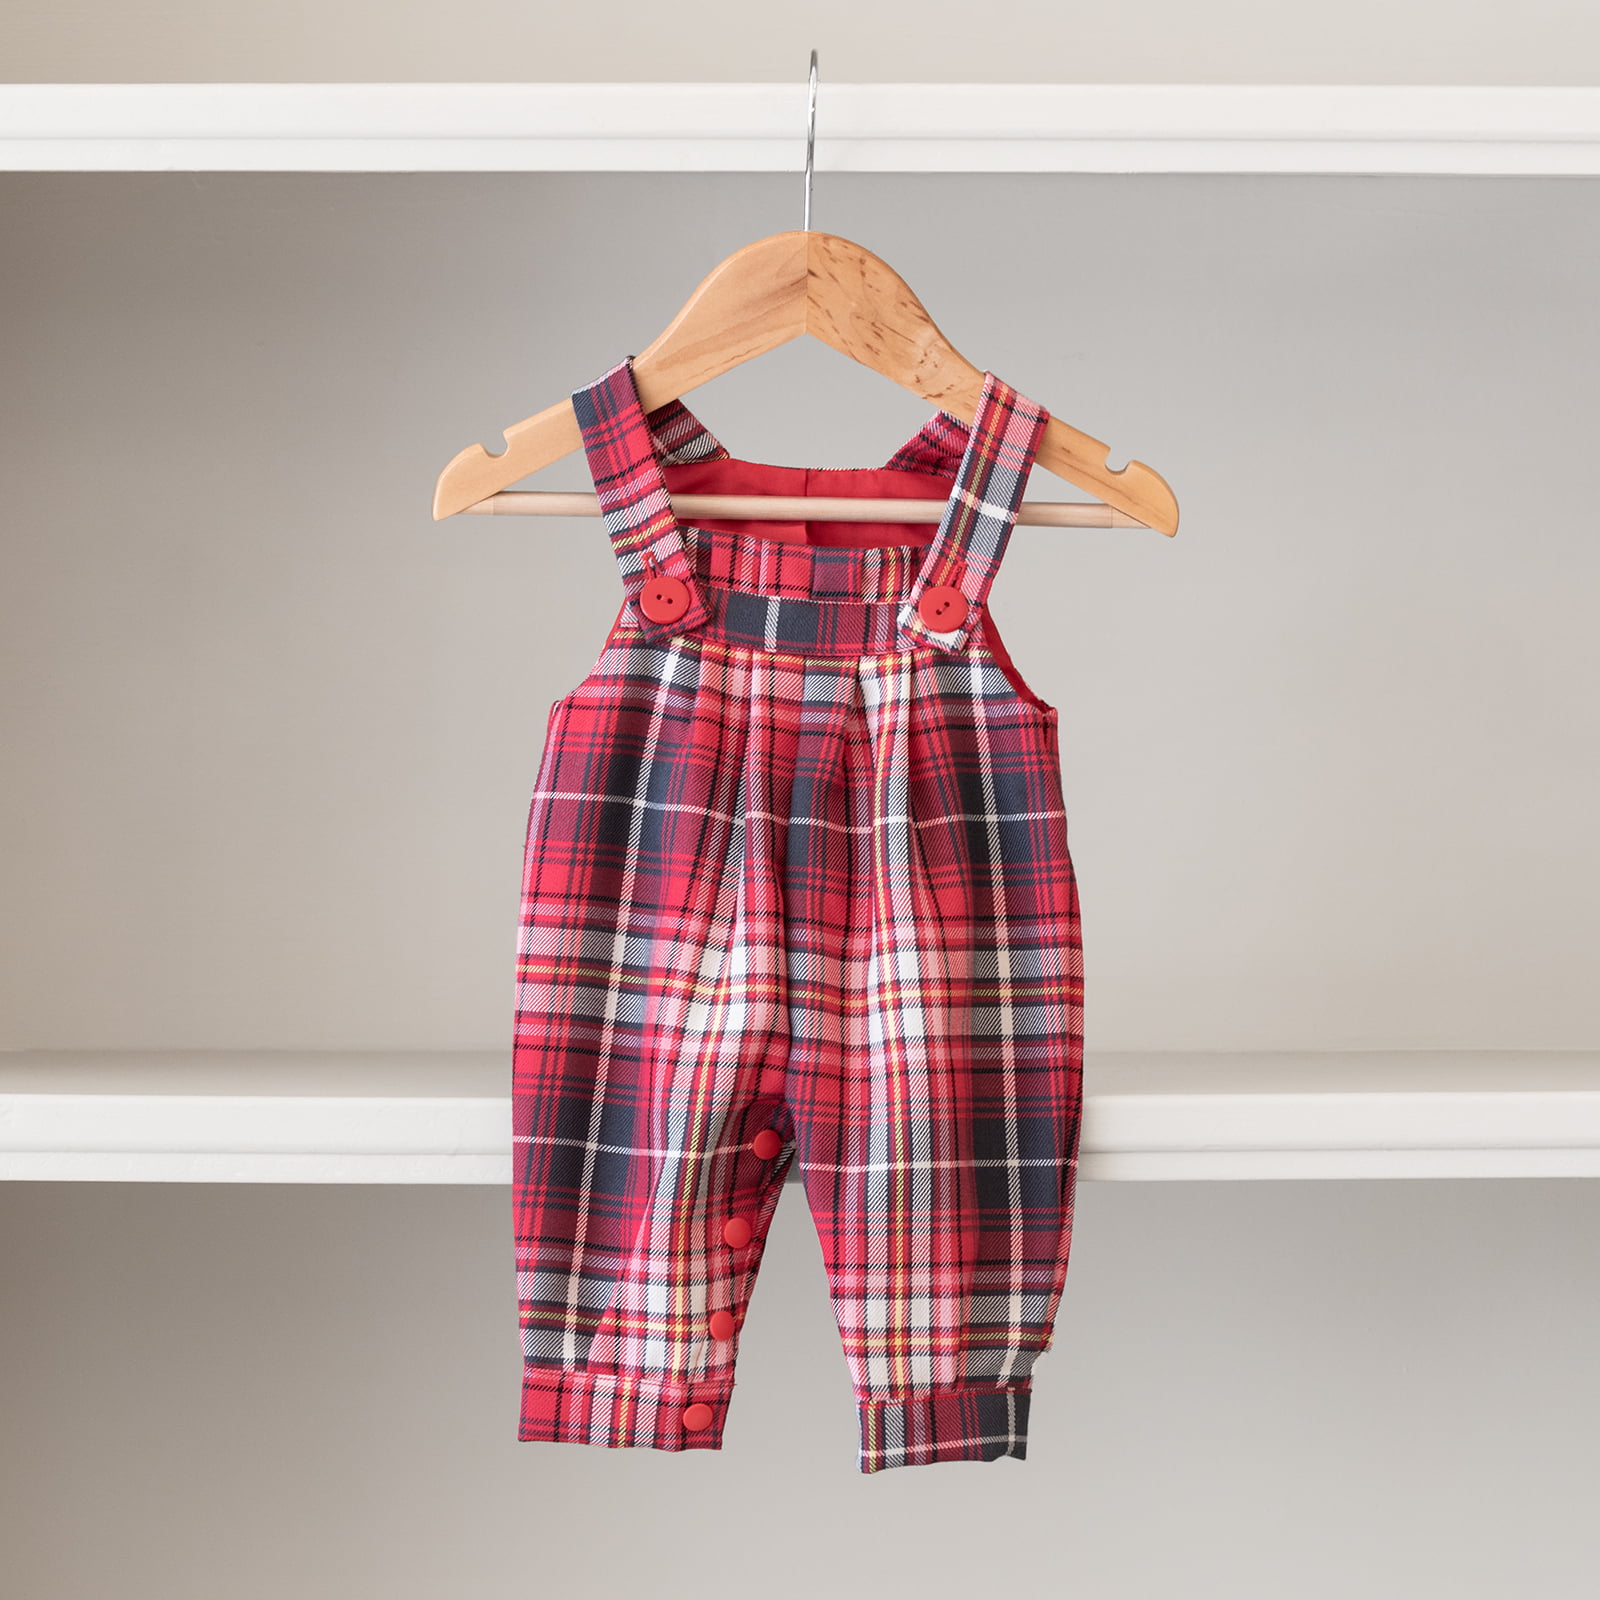 Hand made tartan romper outfit